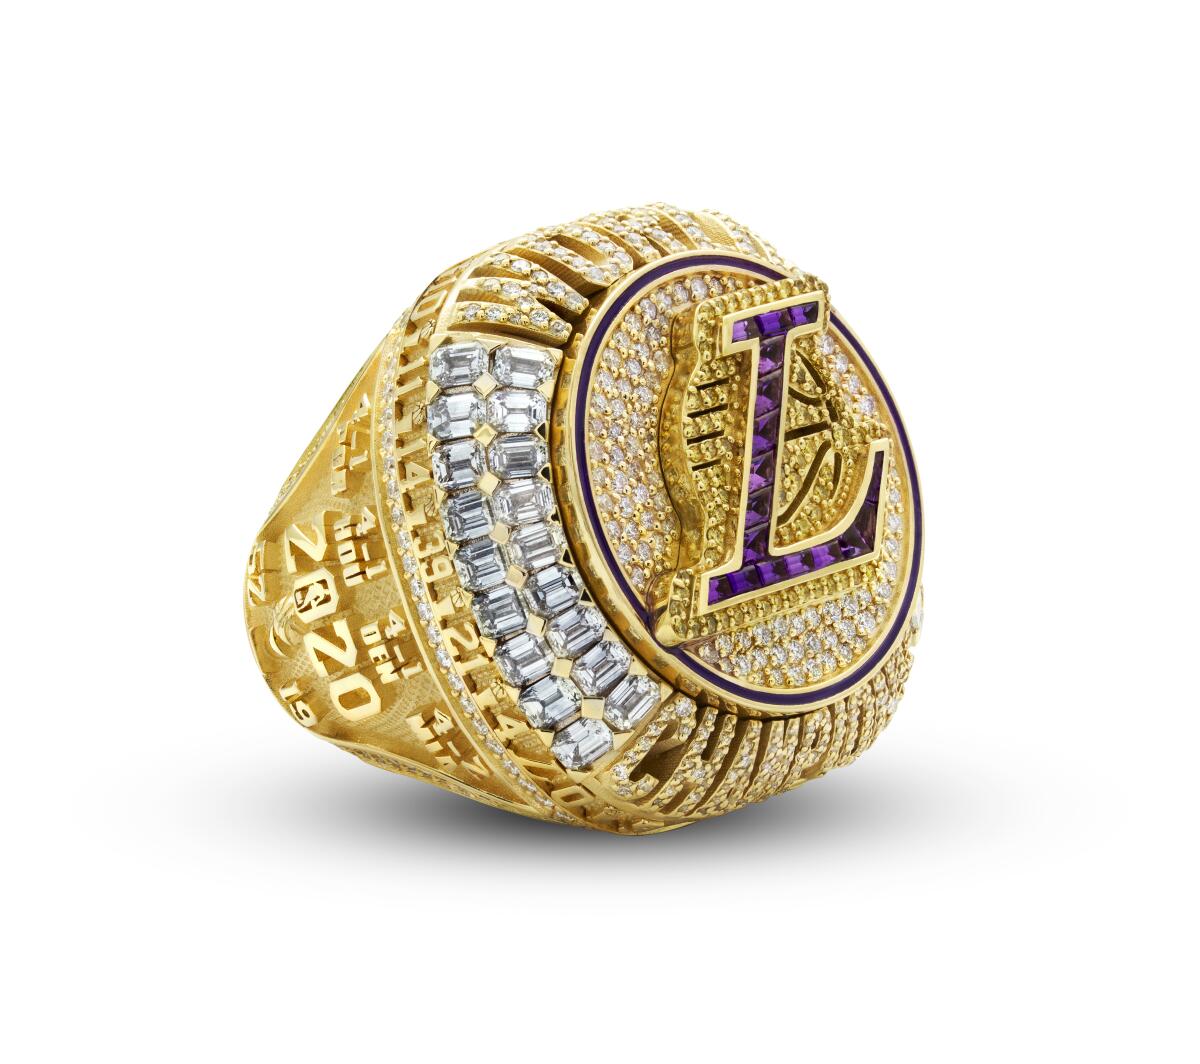 The Lakers hid Kobe tributes in their championship ring